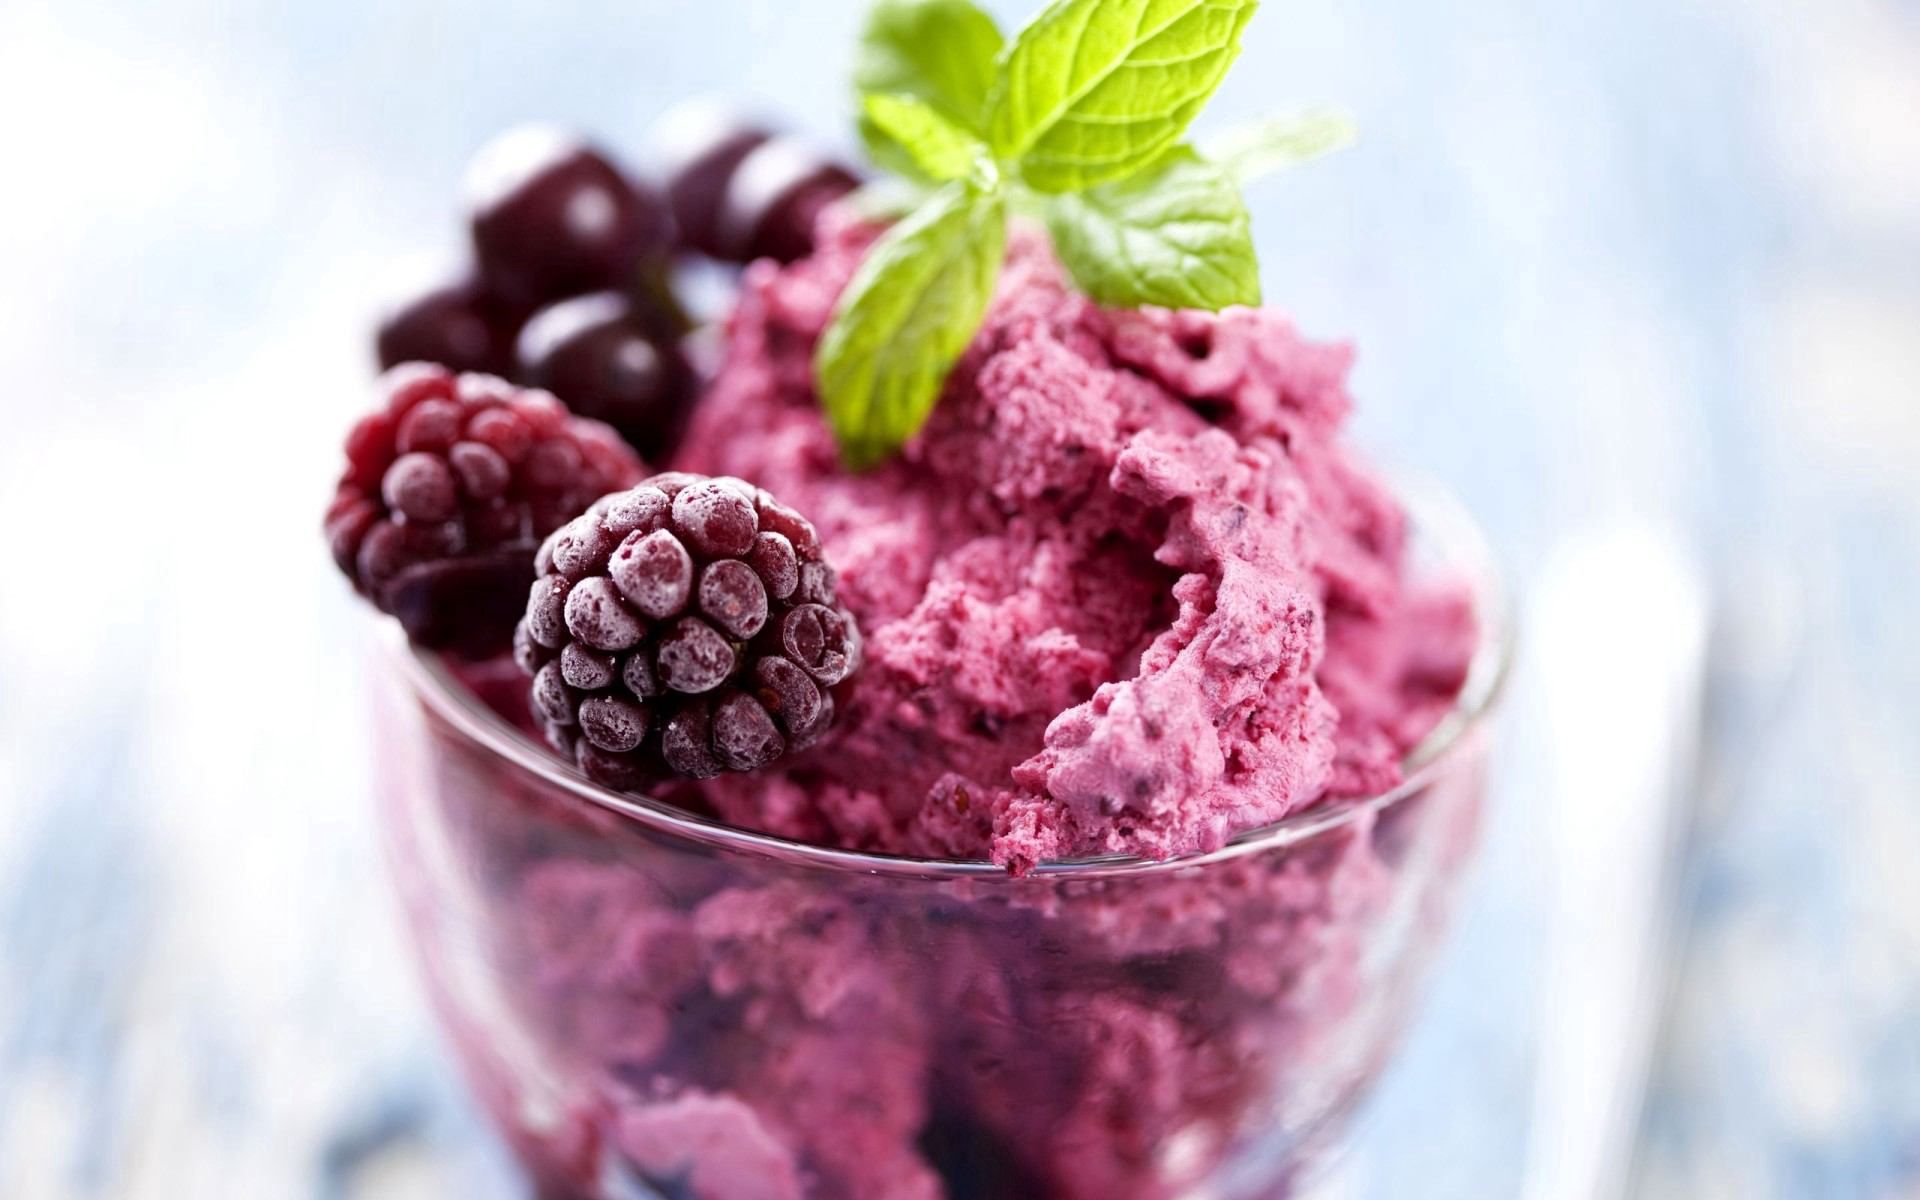 148022 Screensavers and Wallpapers Berry for phone. Download desert, food, ice cream, blackberry, berry pictures for free